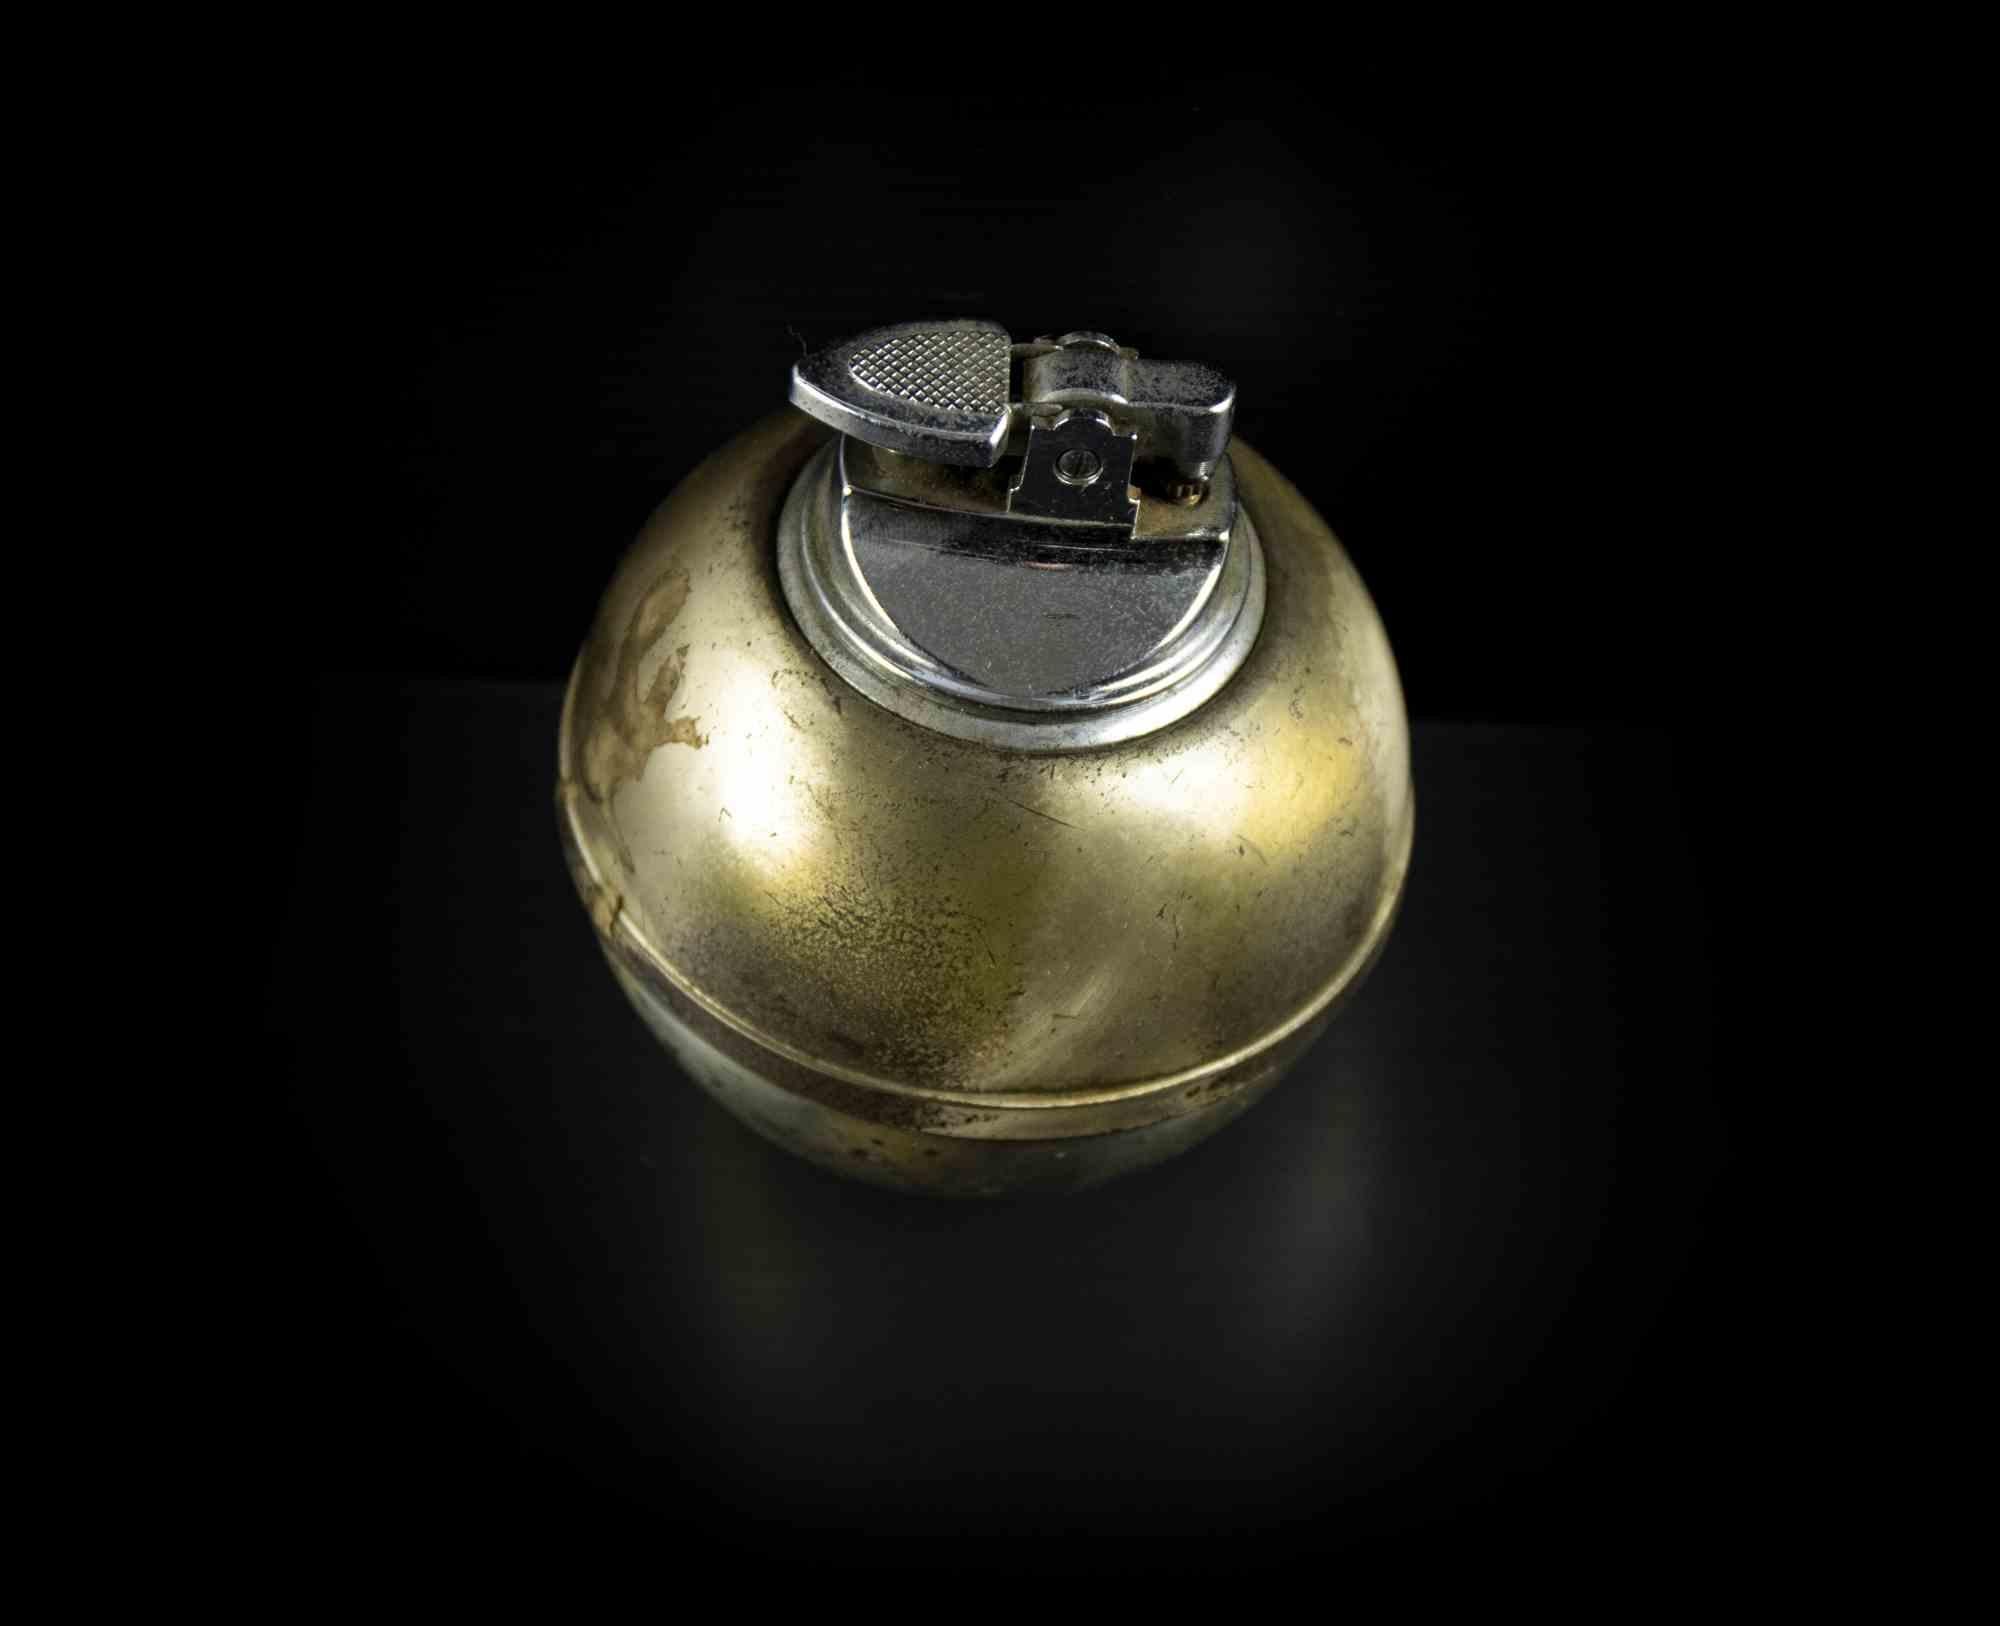 Vintage metal lighter is a original decorative object realized in the mid-20th century.

Made in Italy. 

The object has a spherical shape and is realized completely in metal

Fair conditions: some rust is present on the surface.